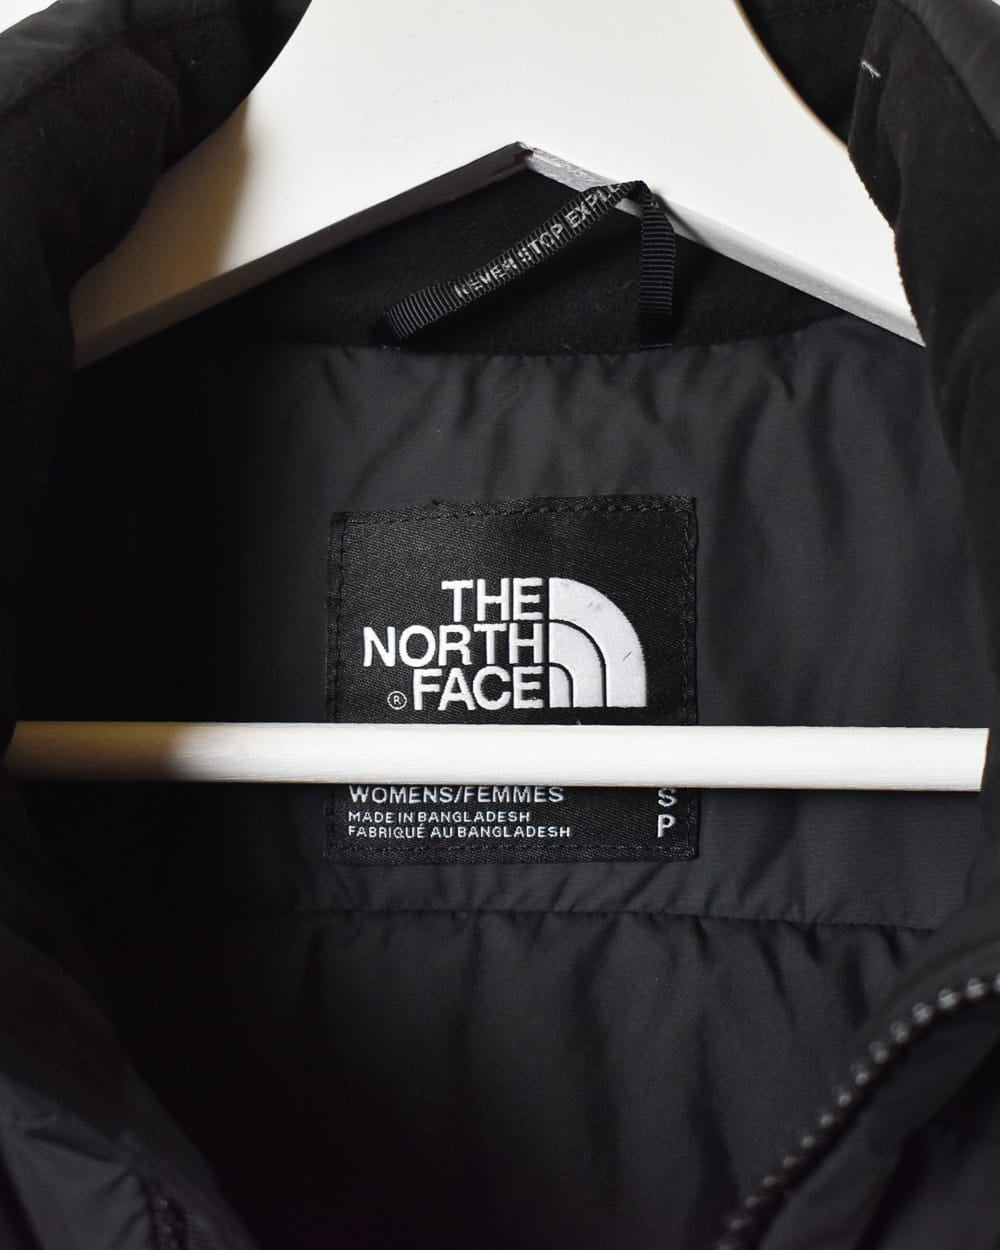 Black The North Face 700 Down Gilet - Small Women's